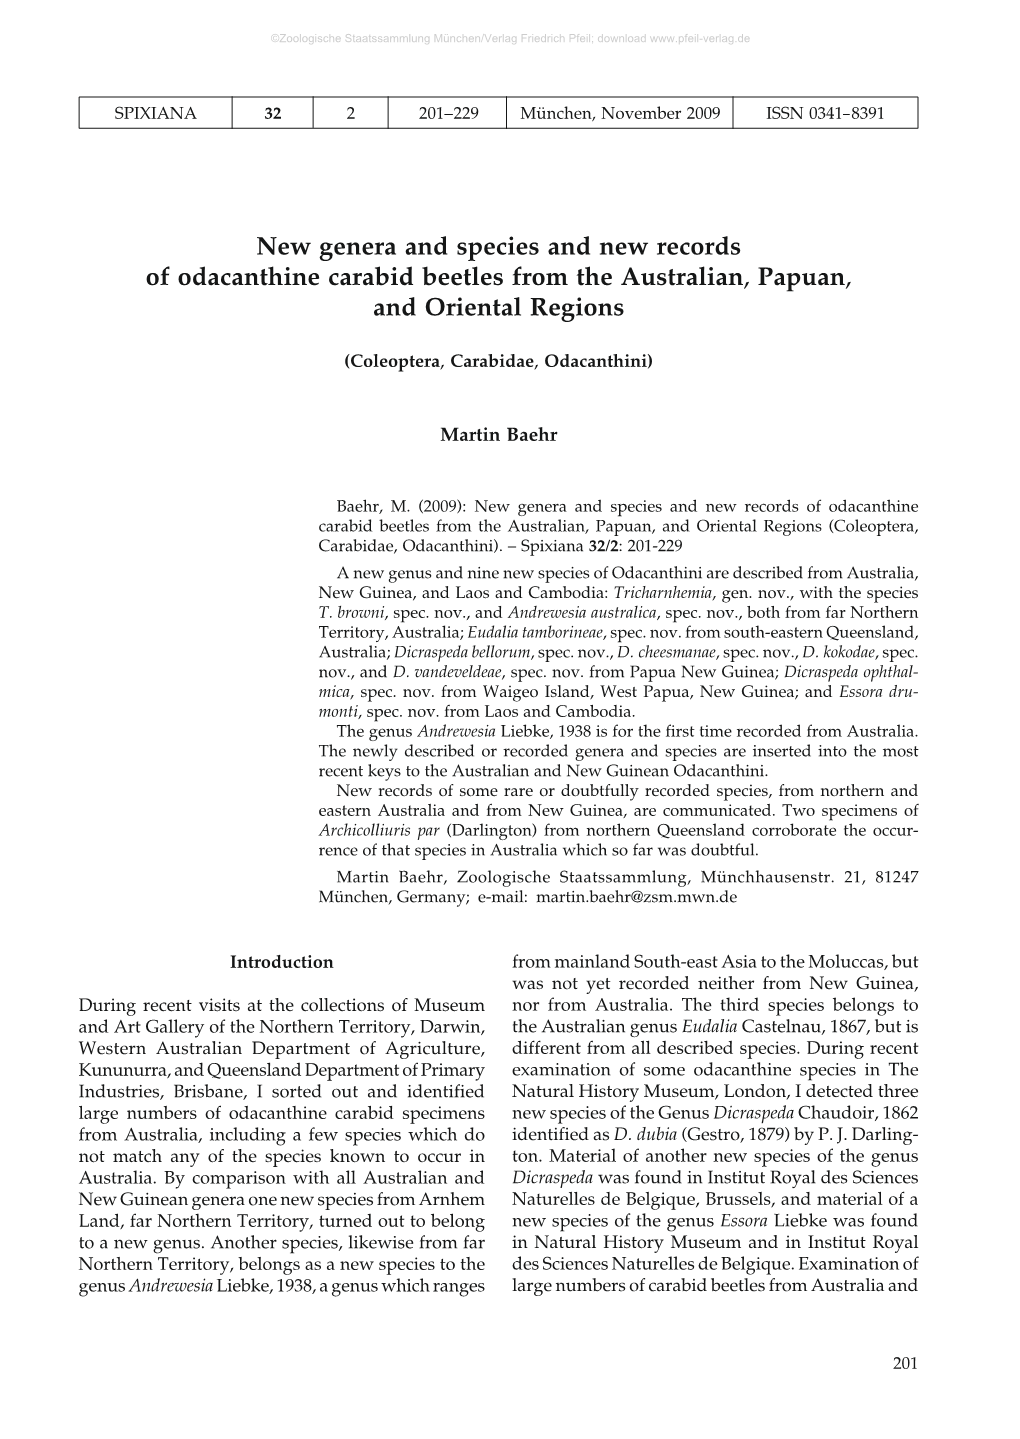 New Genera and Species and New Records of Odacanthine Carabid Beetles from the Australian, Papuan, and Oriental Regions